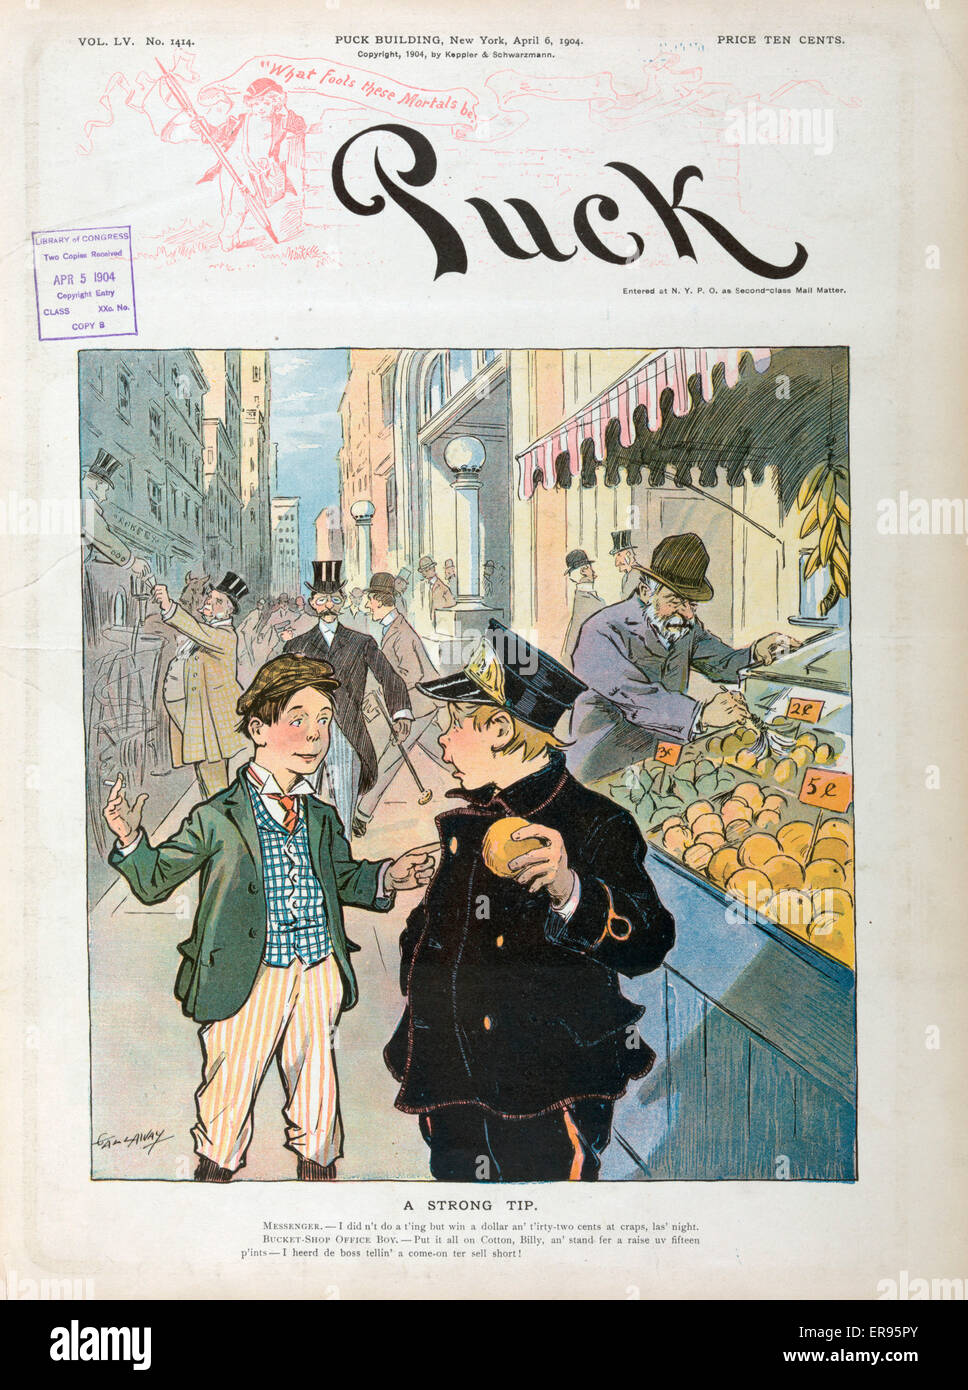 A strong tip. Illustration shows two boys talking on a busy city sidewalk next to a produce stand. Date 1904 April 6. Stock Photo